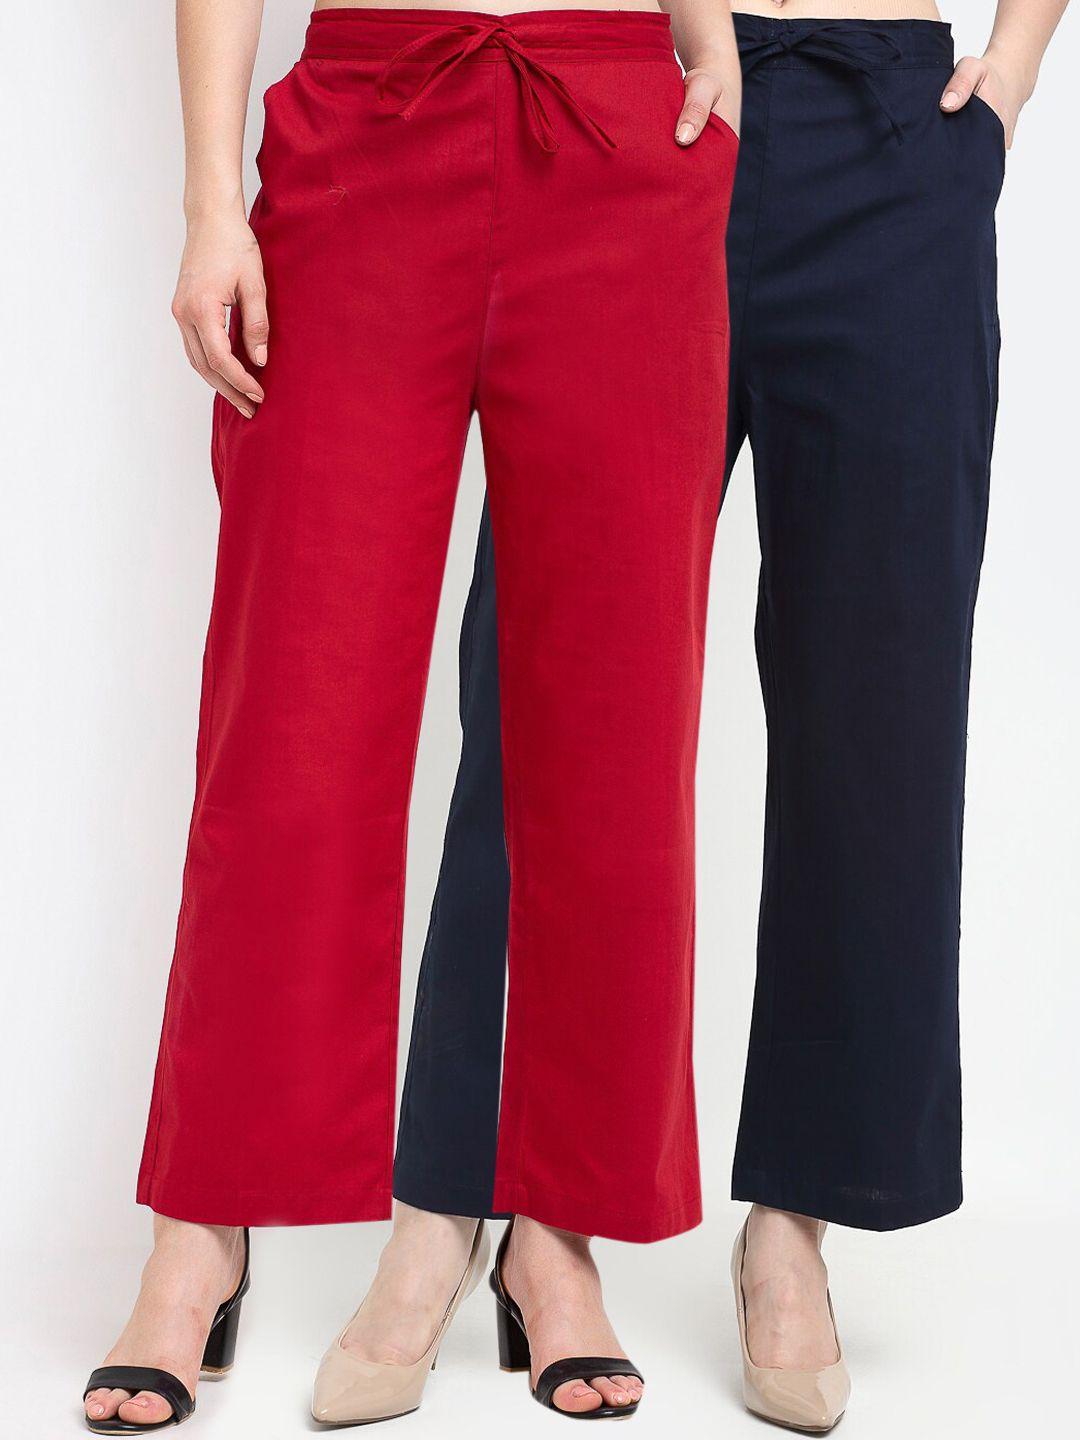 gracit-women-pack-of-2-maroon-&-navy-blue-loose-fit-trousers